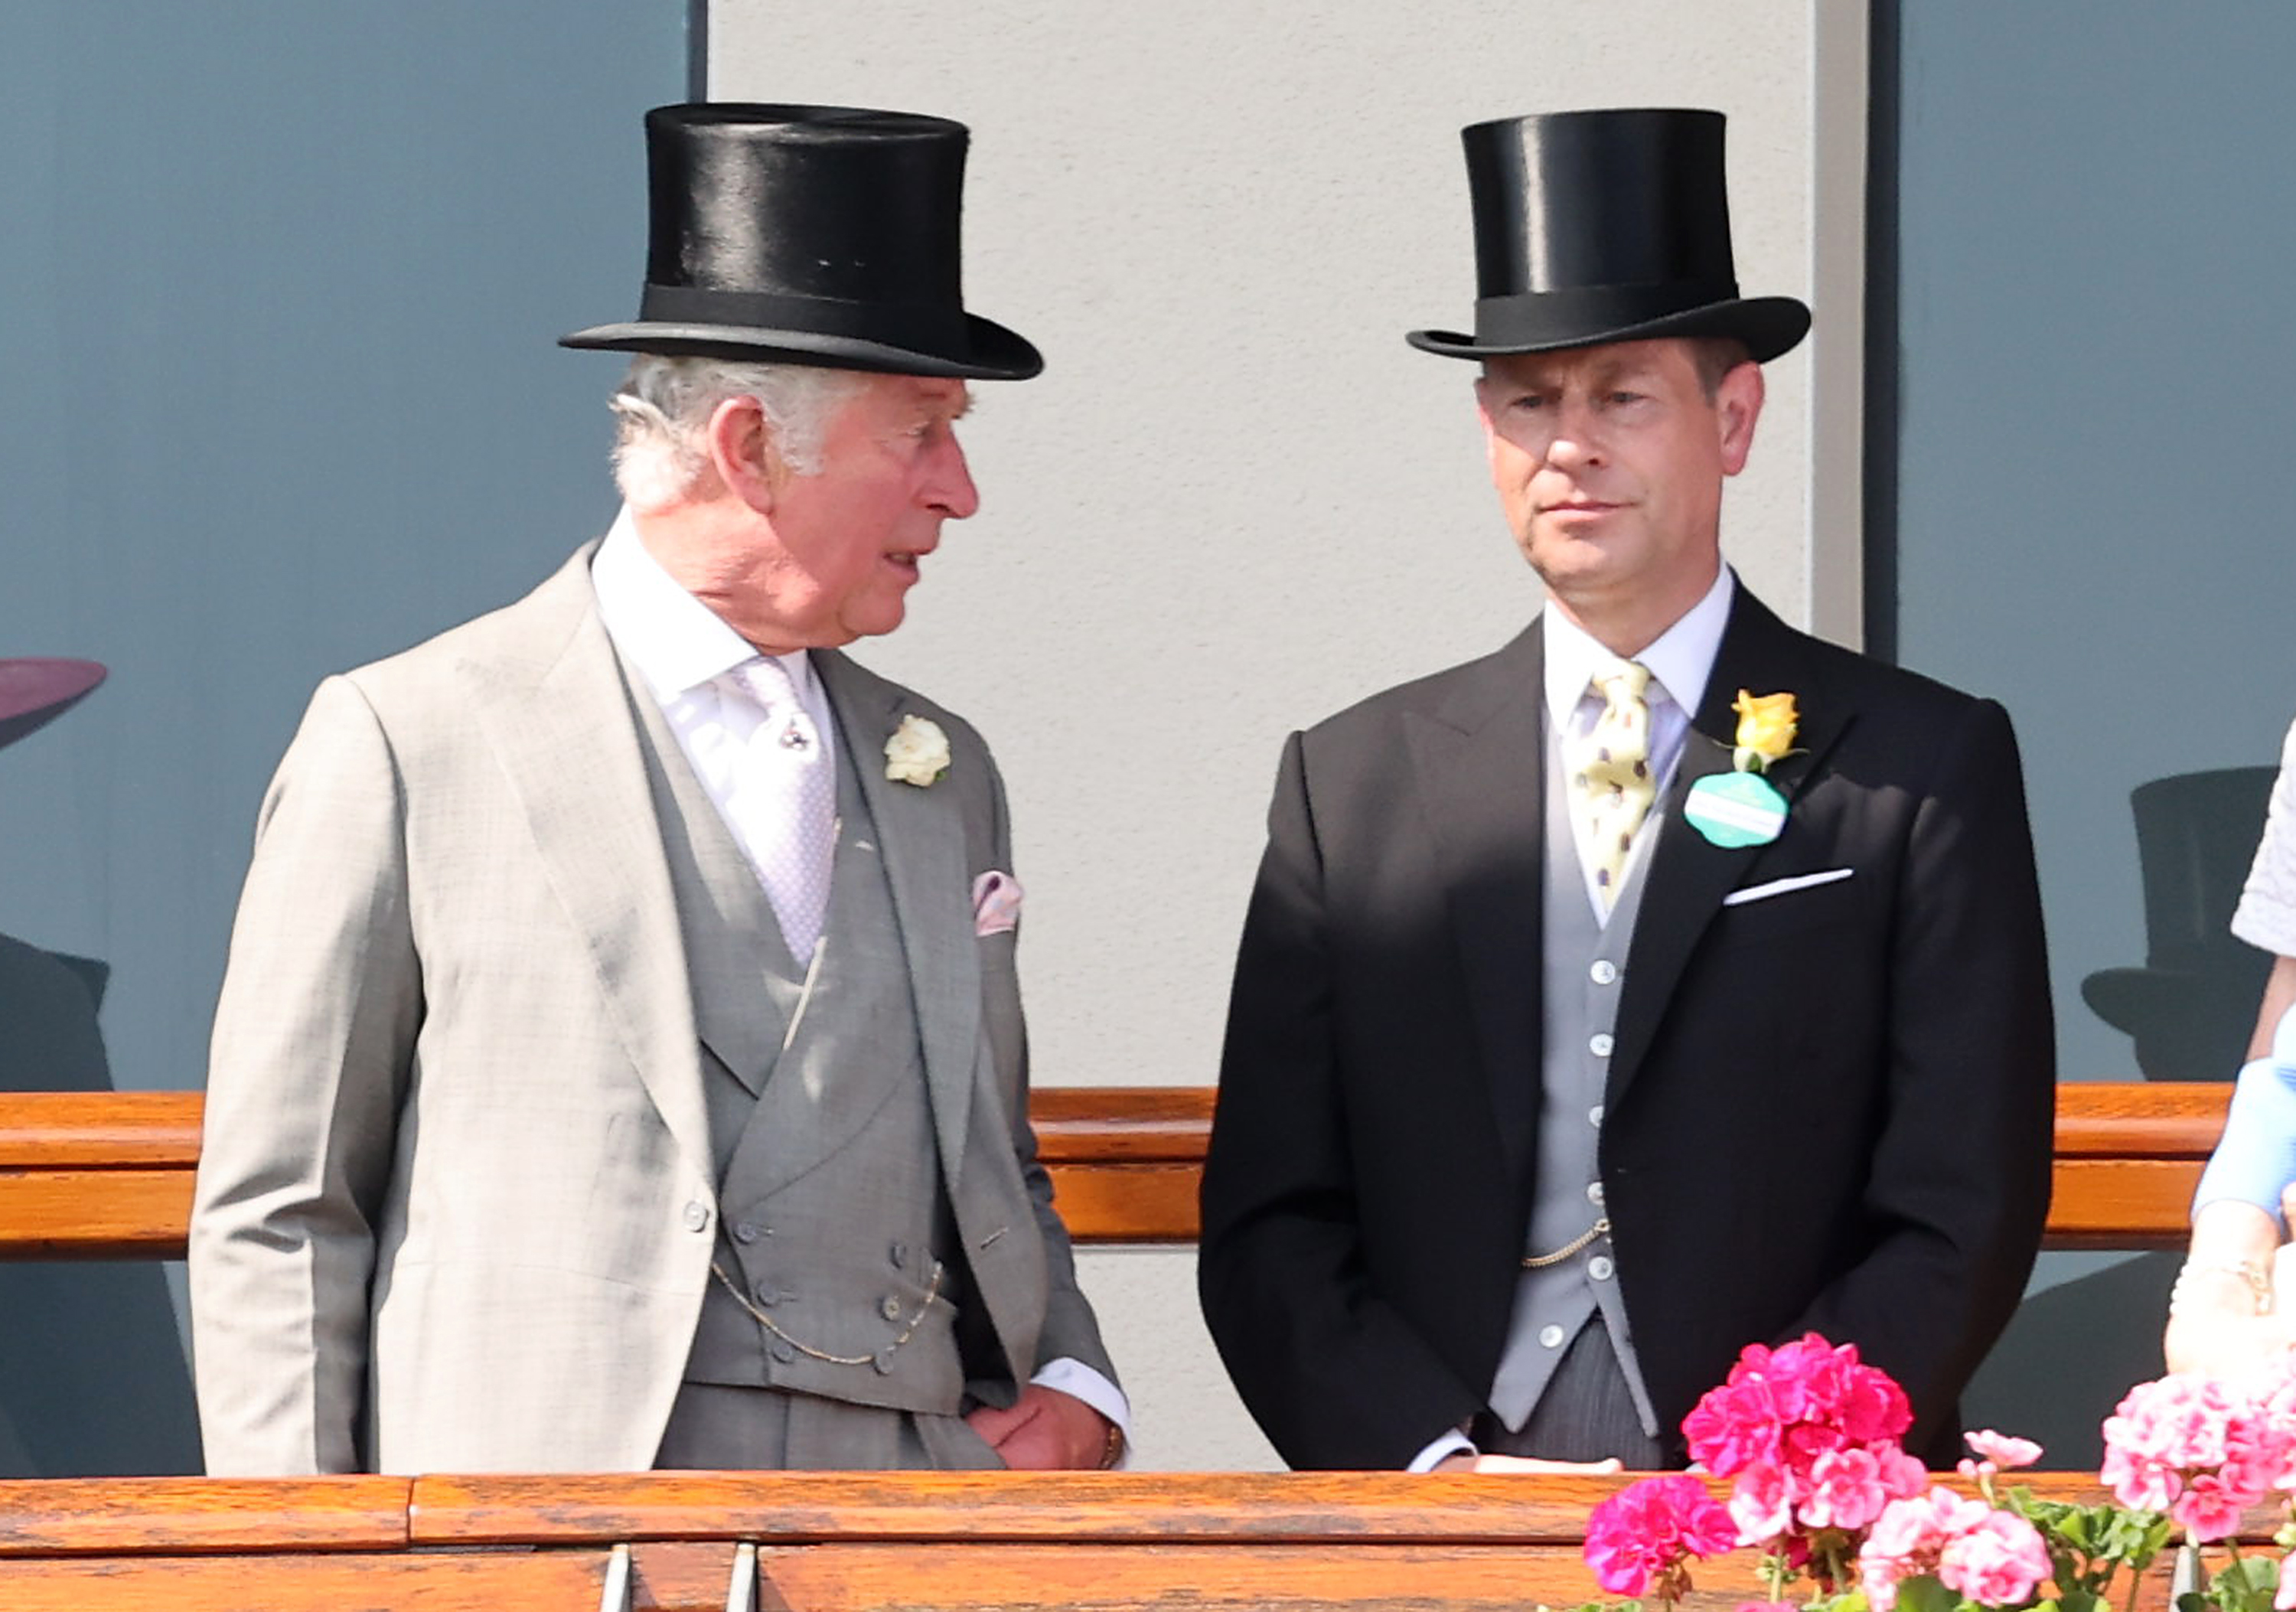 Prince Charles and Prince Edward standing next to one another during Royal Ascot 2021